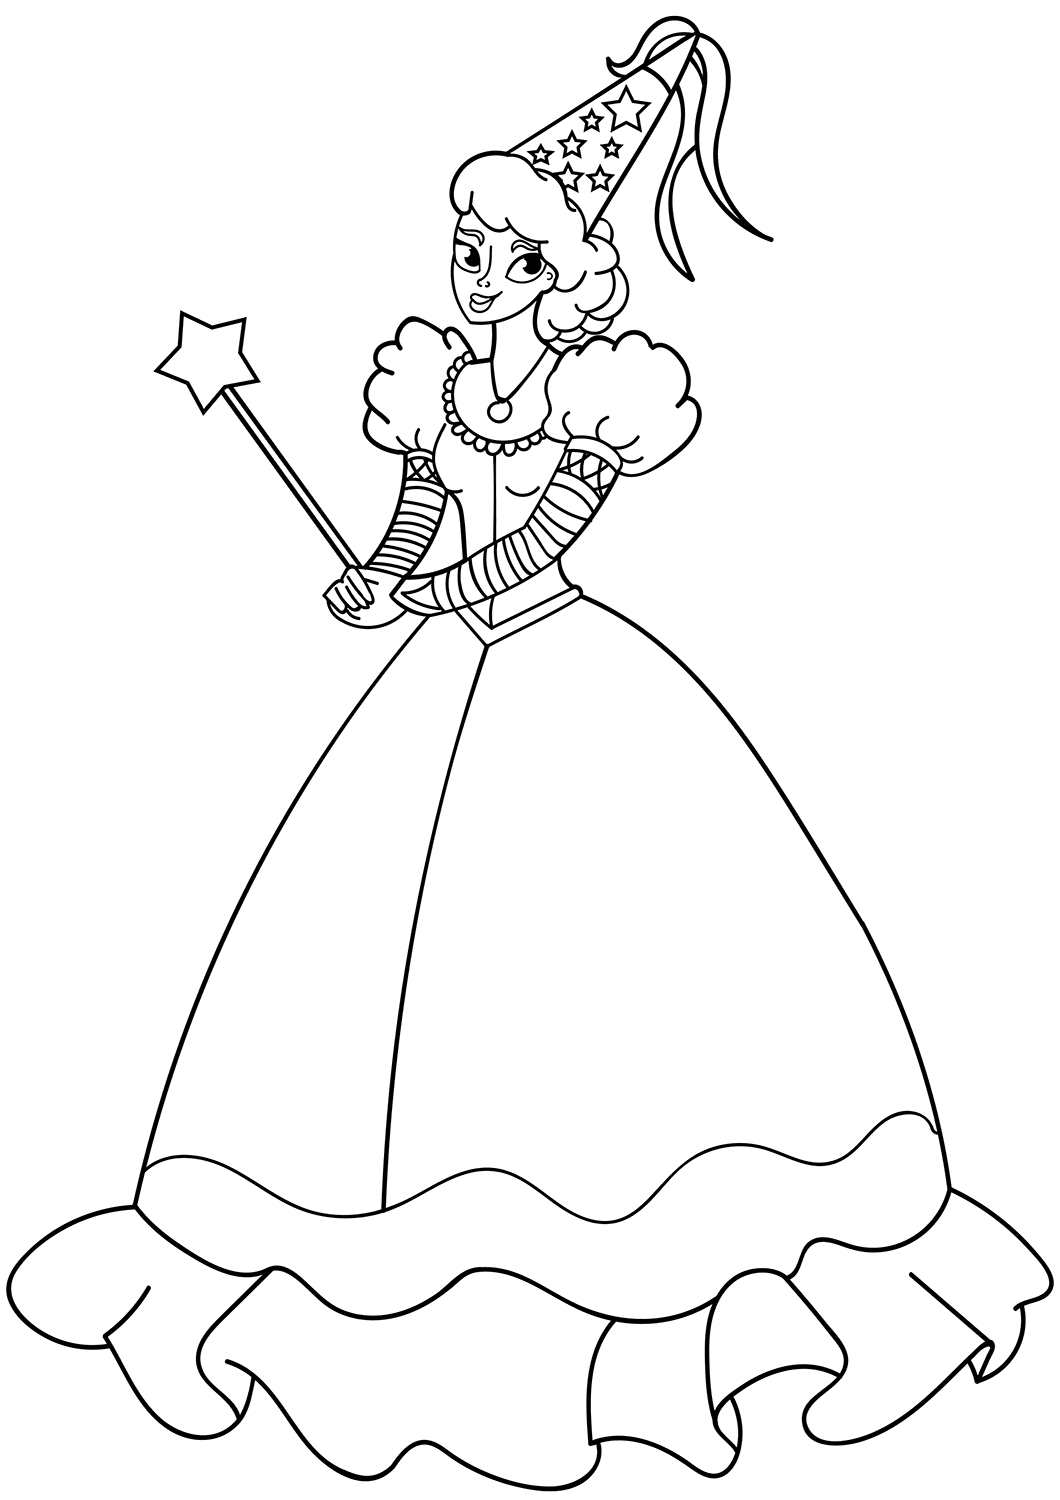 Fairy Dream Girl Coloring Page